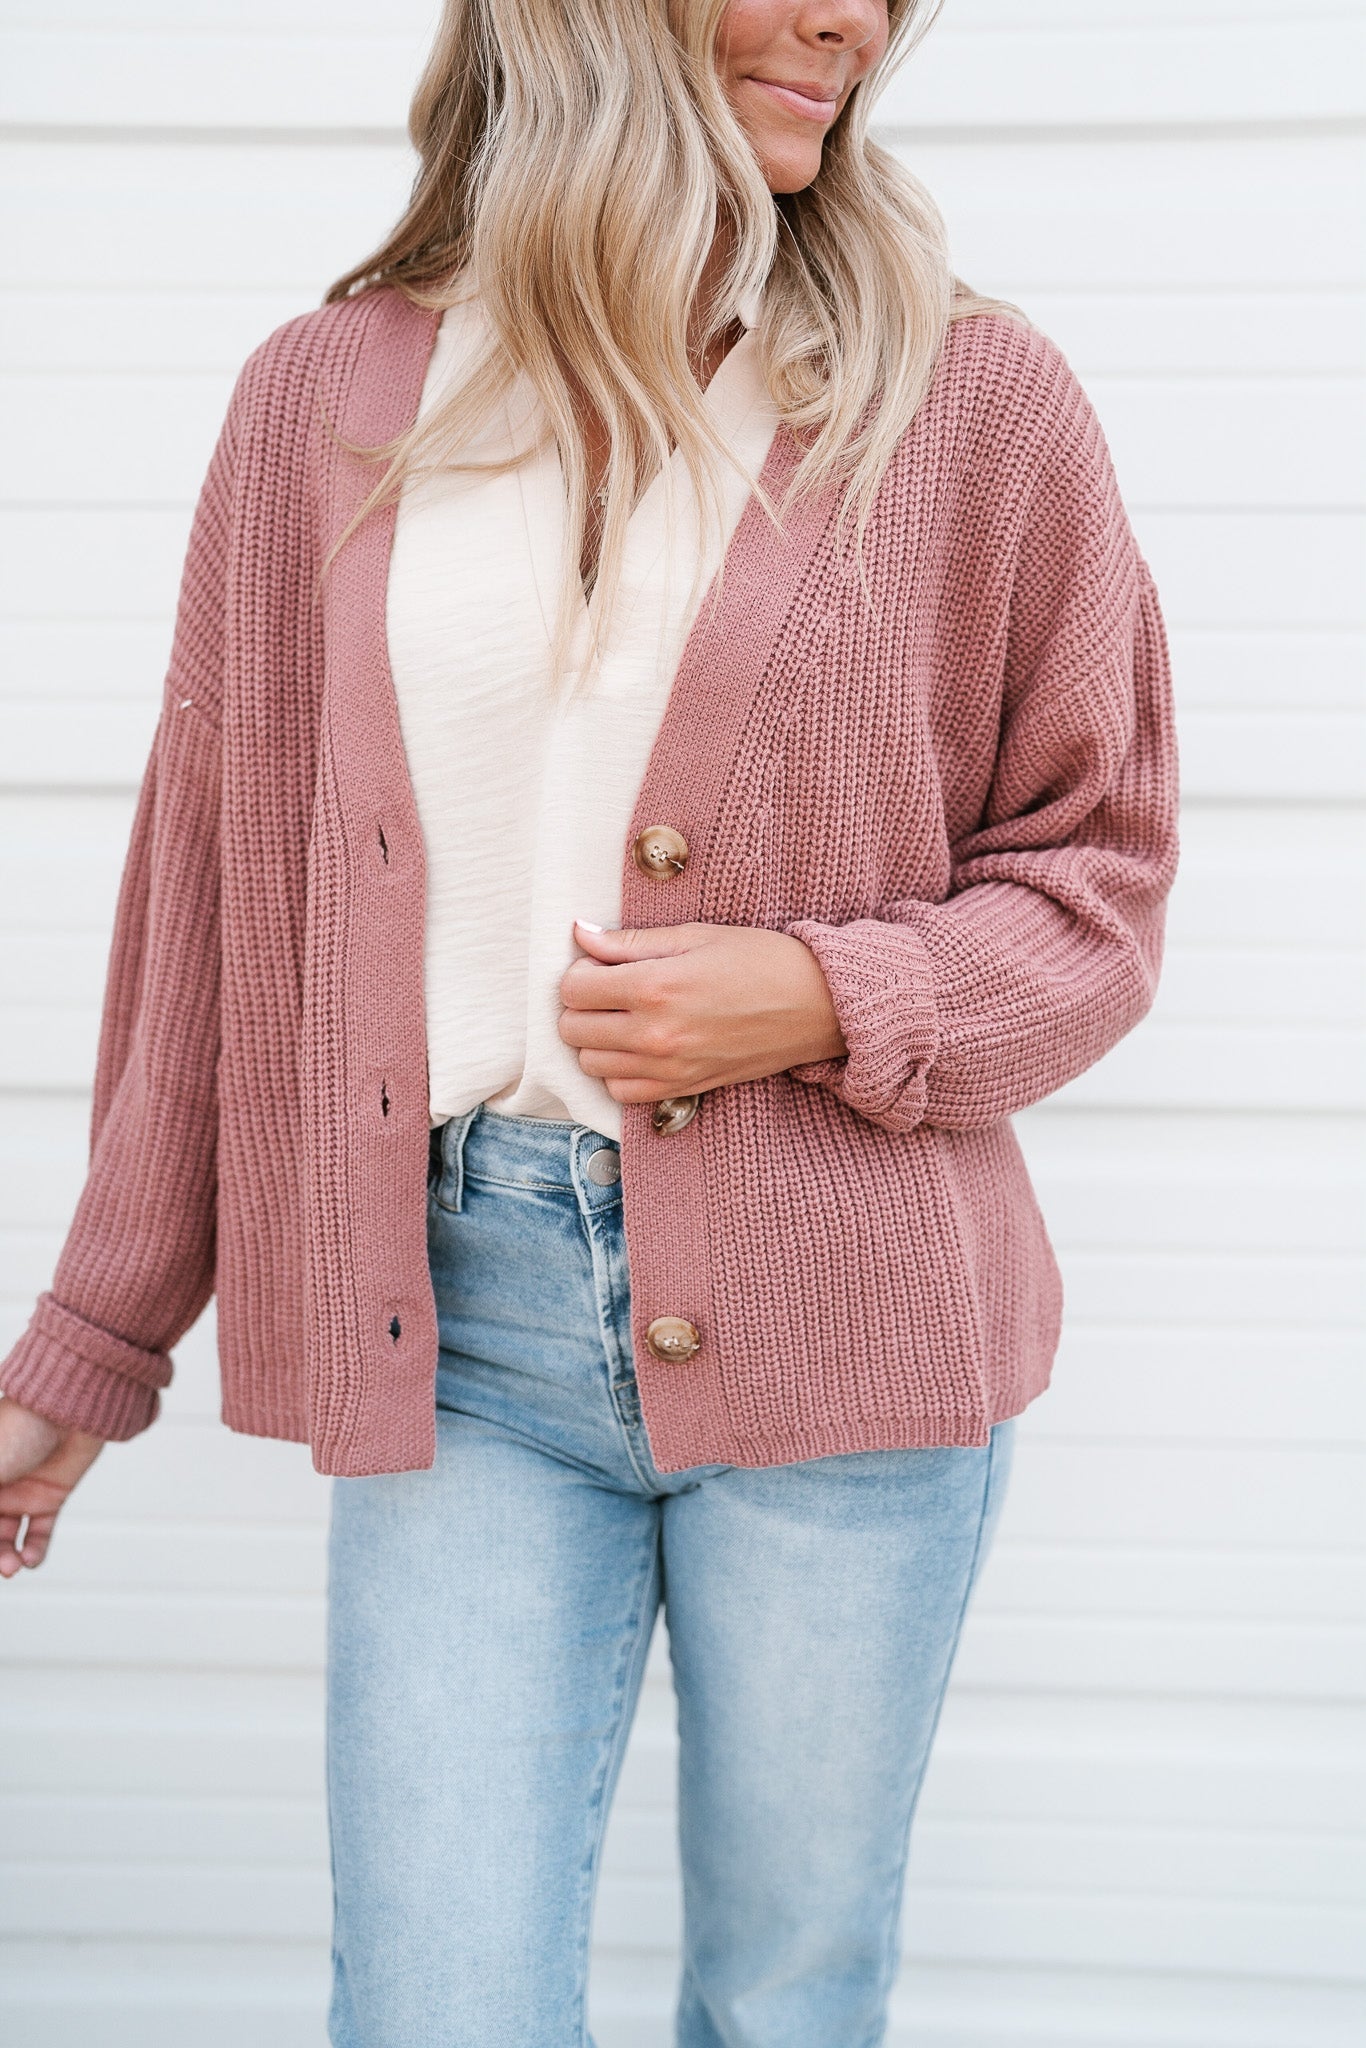 Come Cabin With Me Cardigan